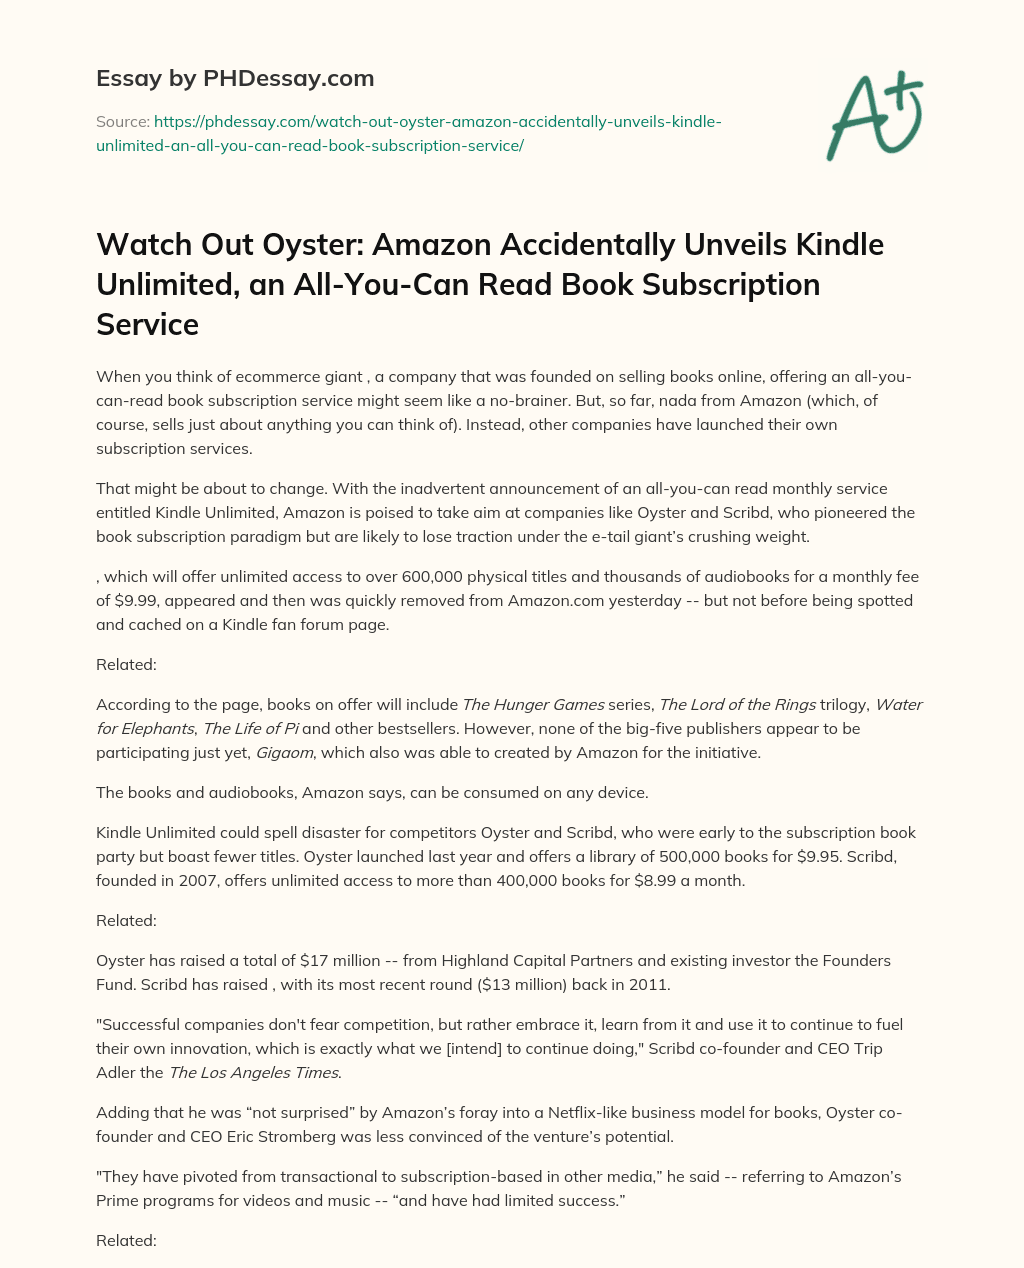 Watch Out Oyster: Amazon Accidentally Unveils Kindle Unlimited, an All-You-Can Read Book Subscription Service essay